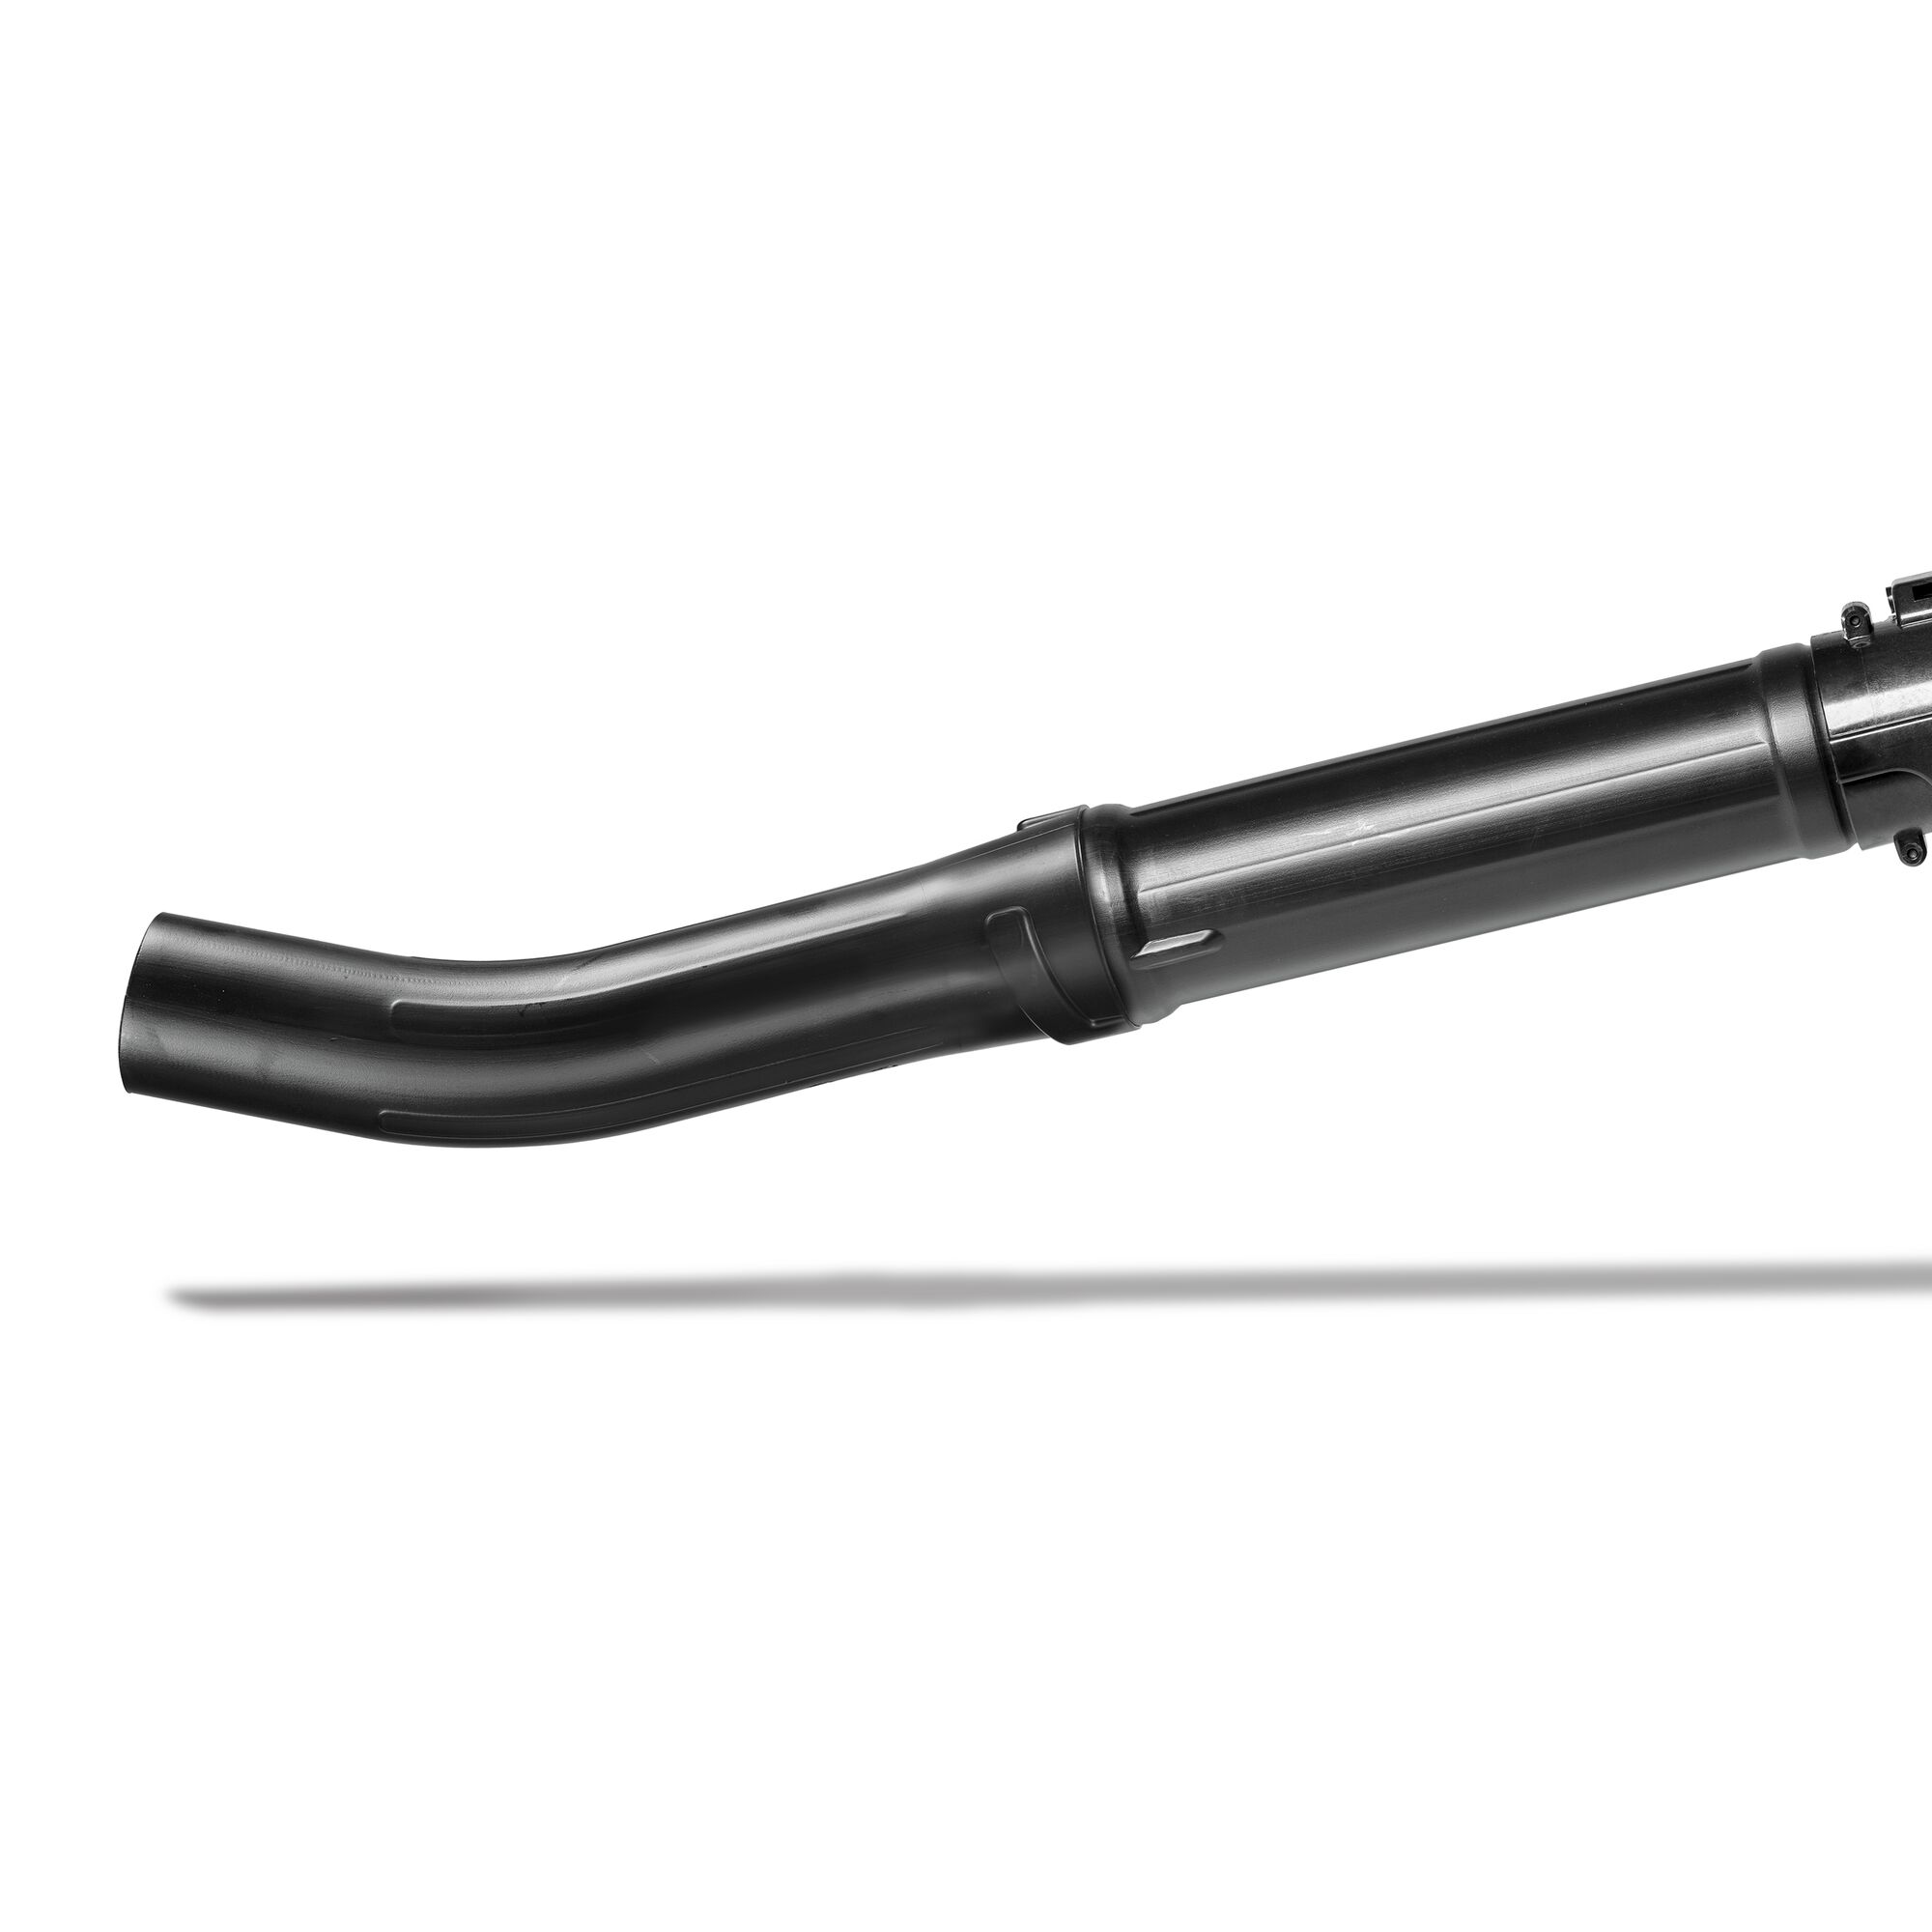 Curved nozzle feature in B2500 27 CC 2 cycle gas leaf blower.